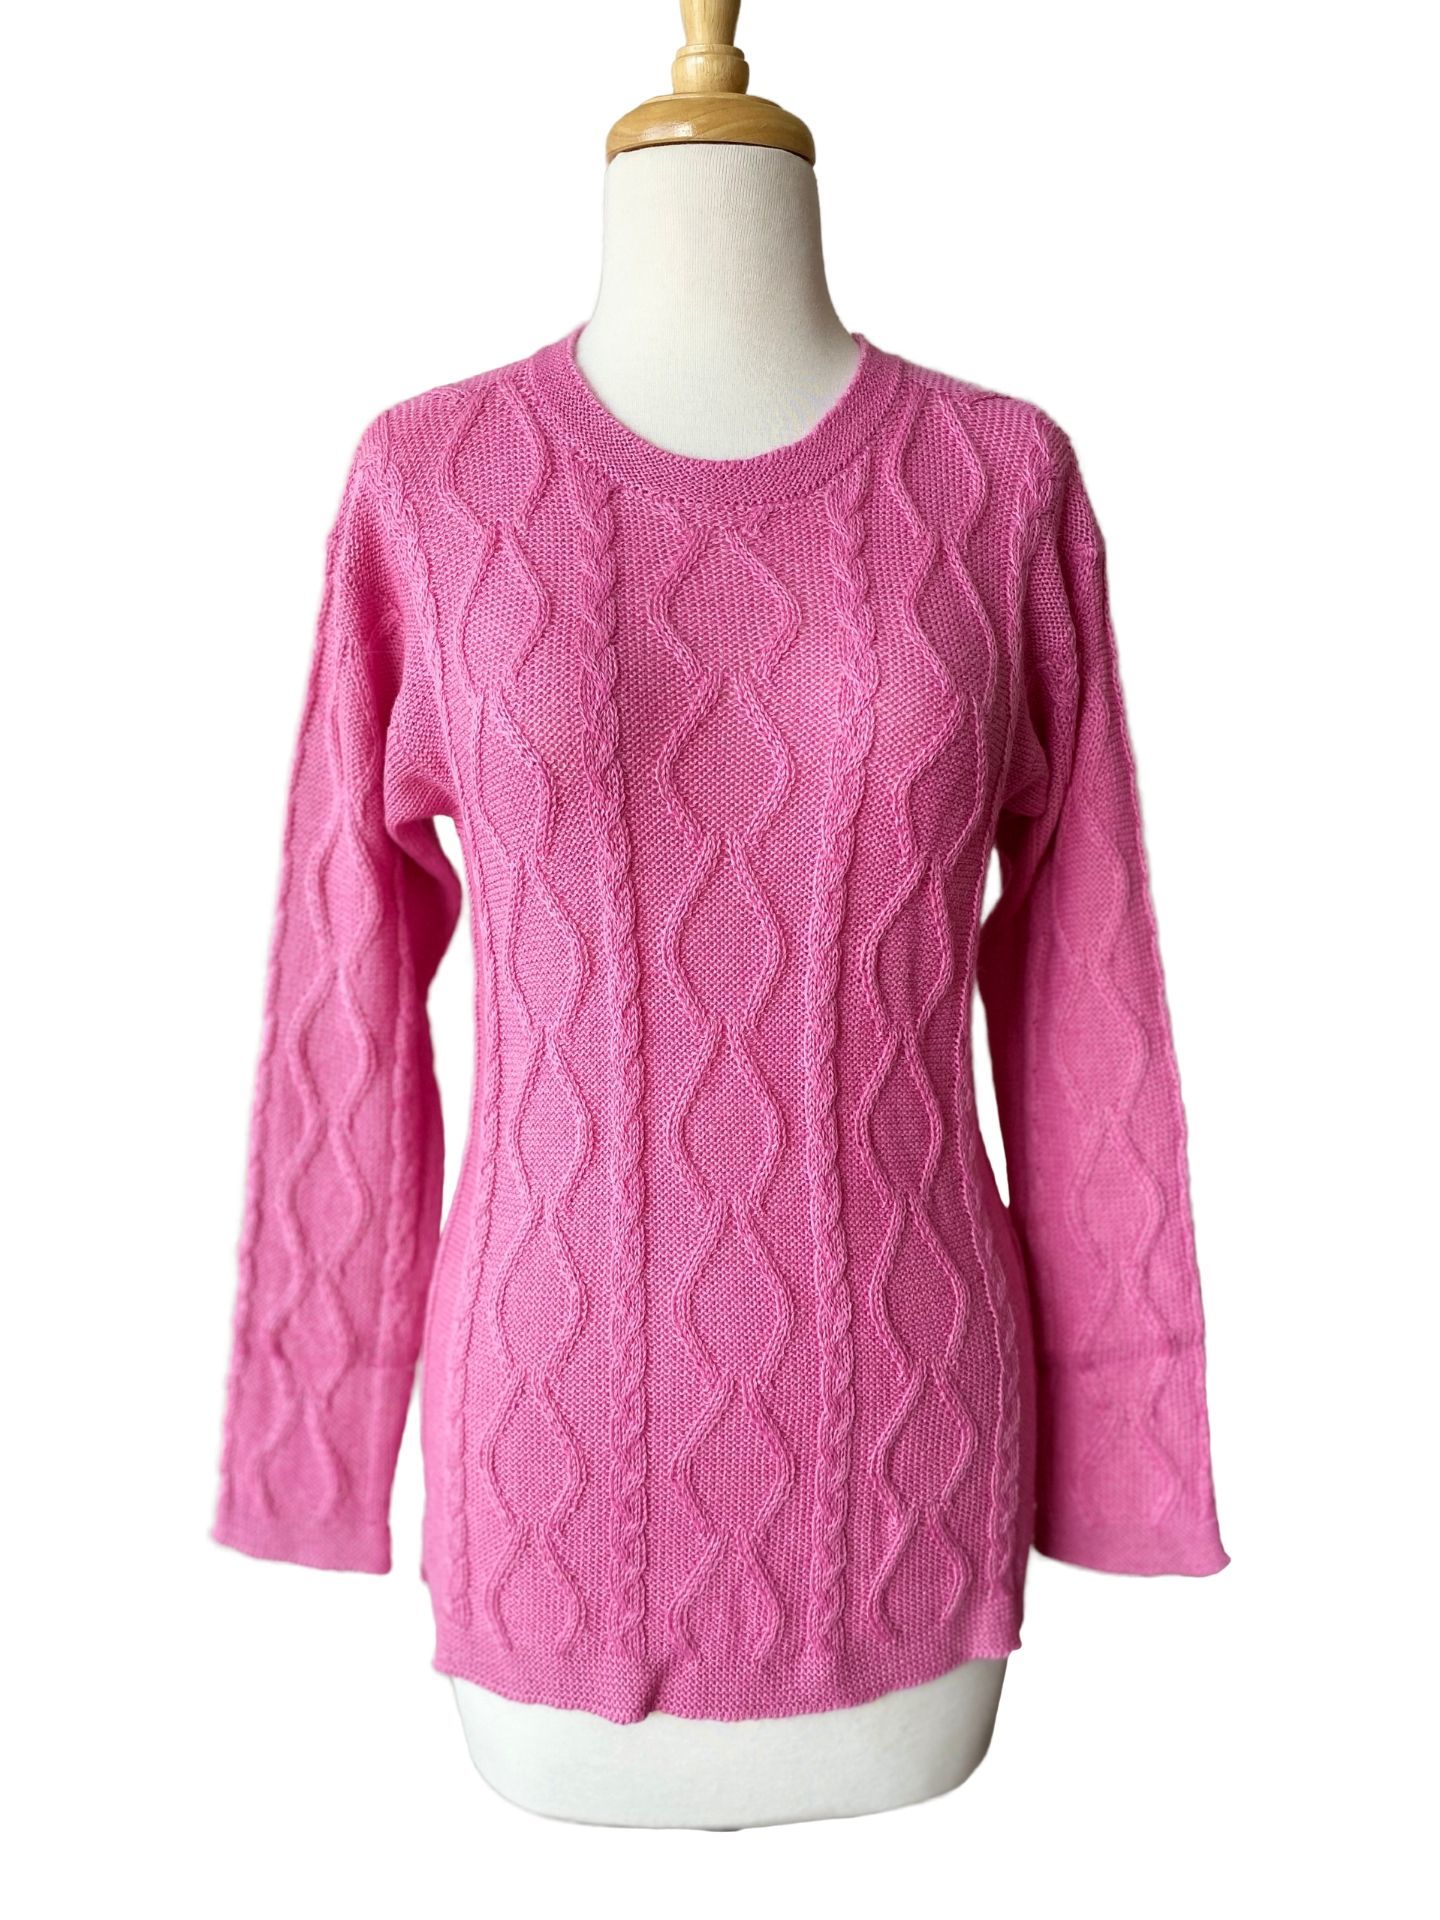 Hand Knitted Cable Sweater - Pink - 1